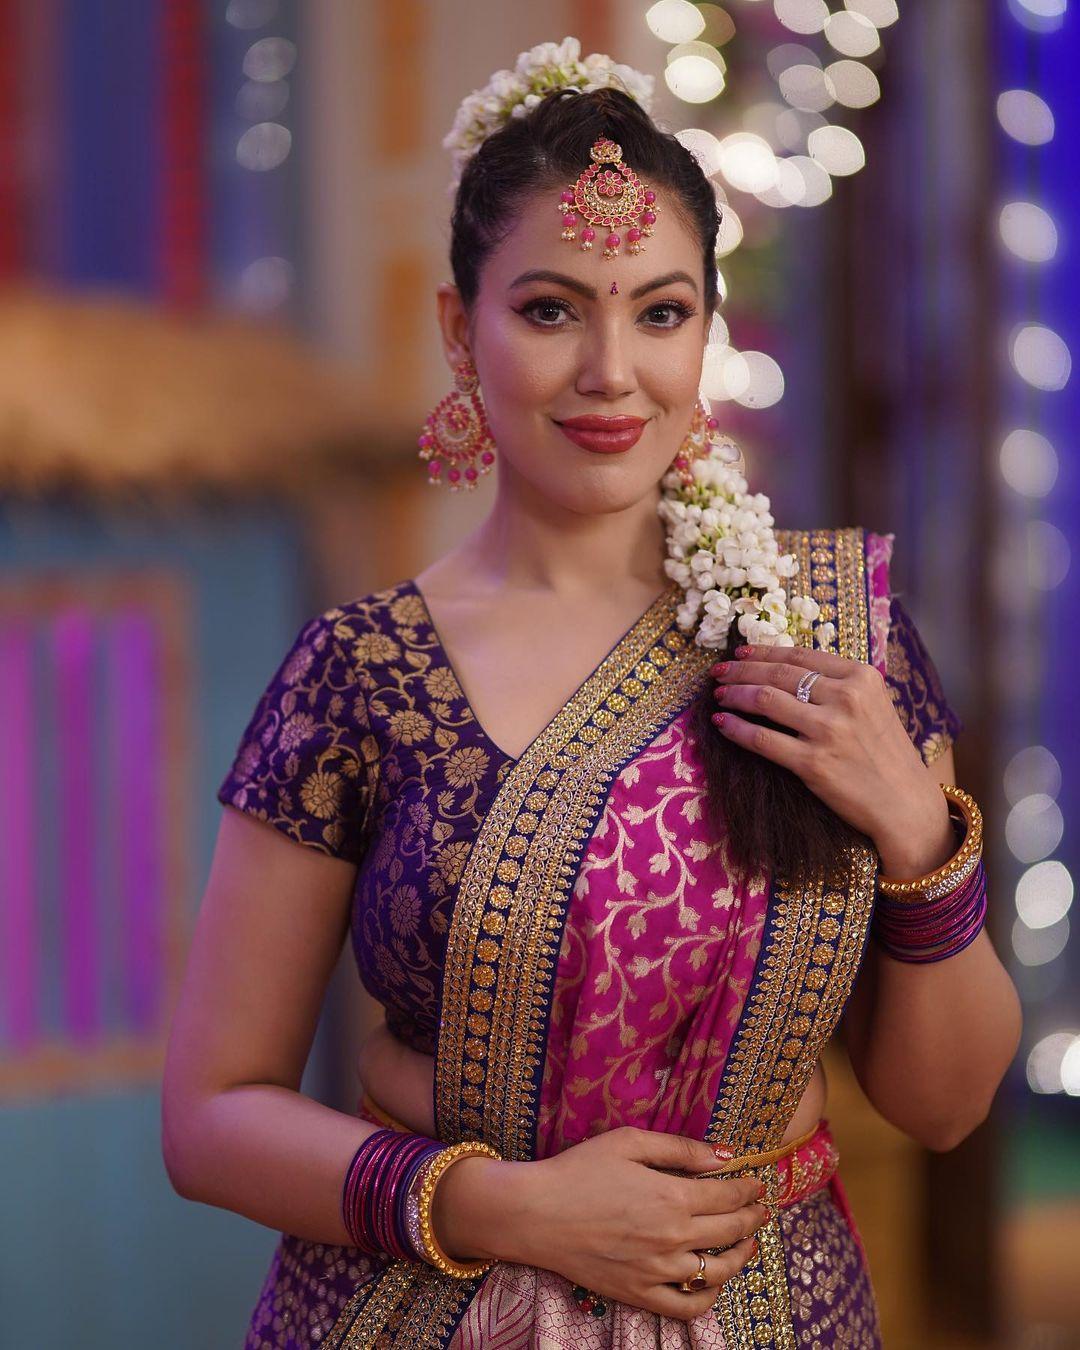 The actress donned exquisite pieces of jewelry and adorned her hair with a lovely gajra